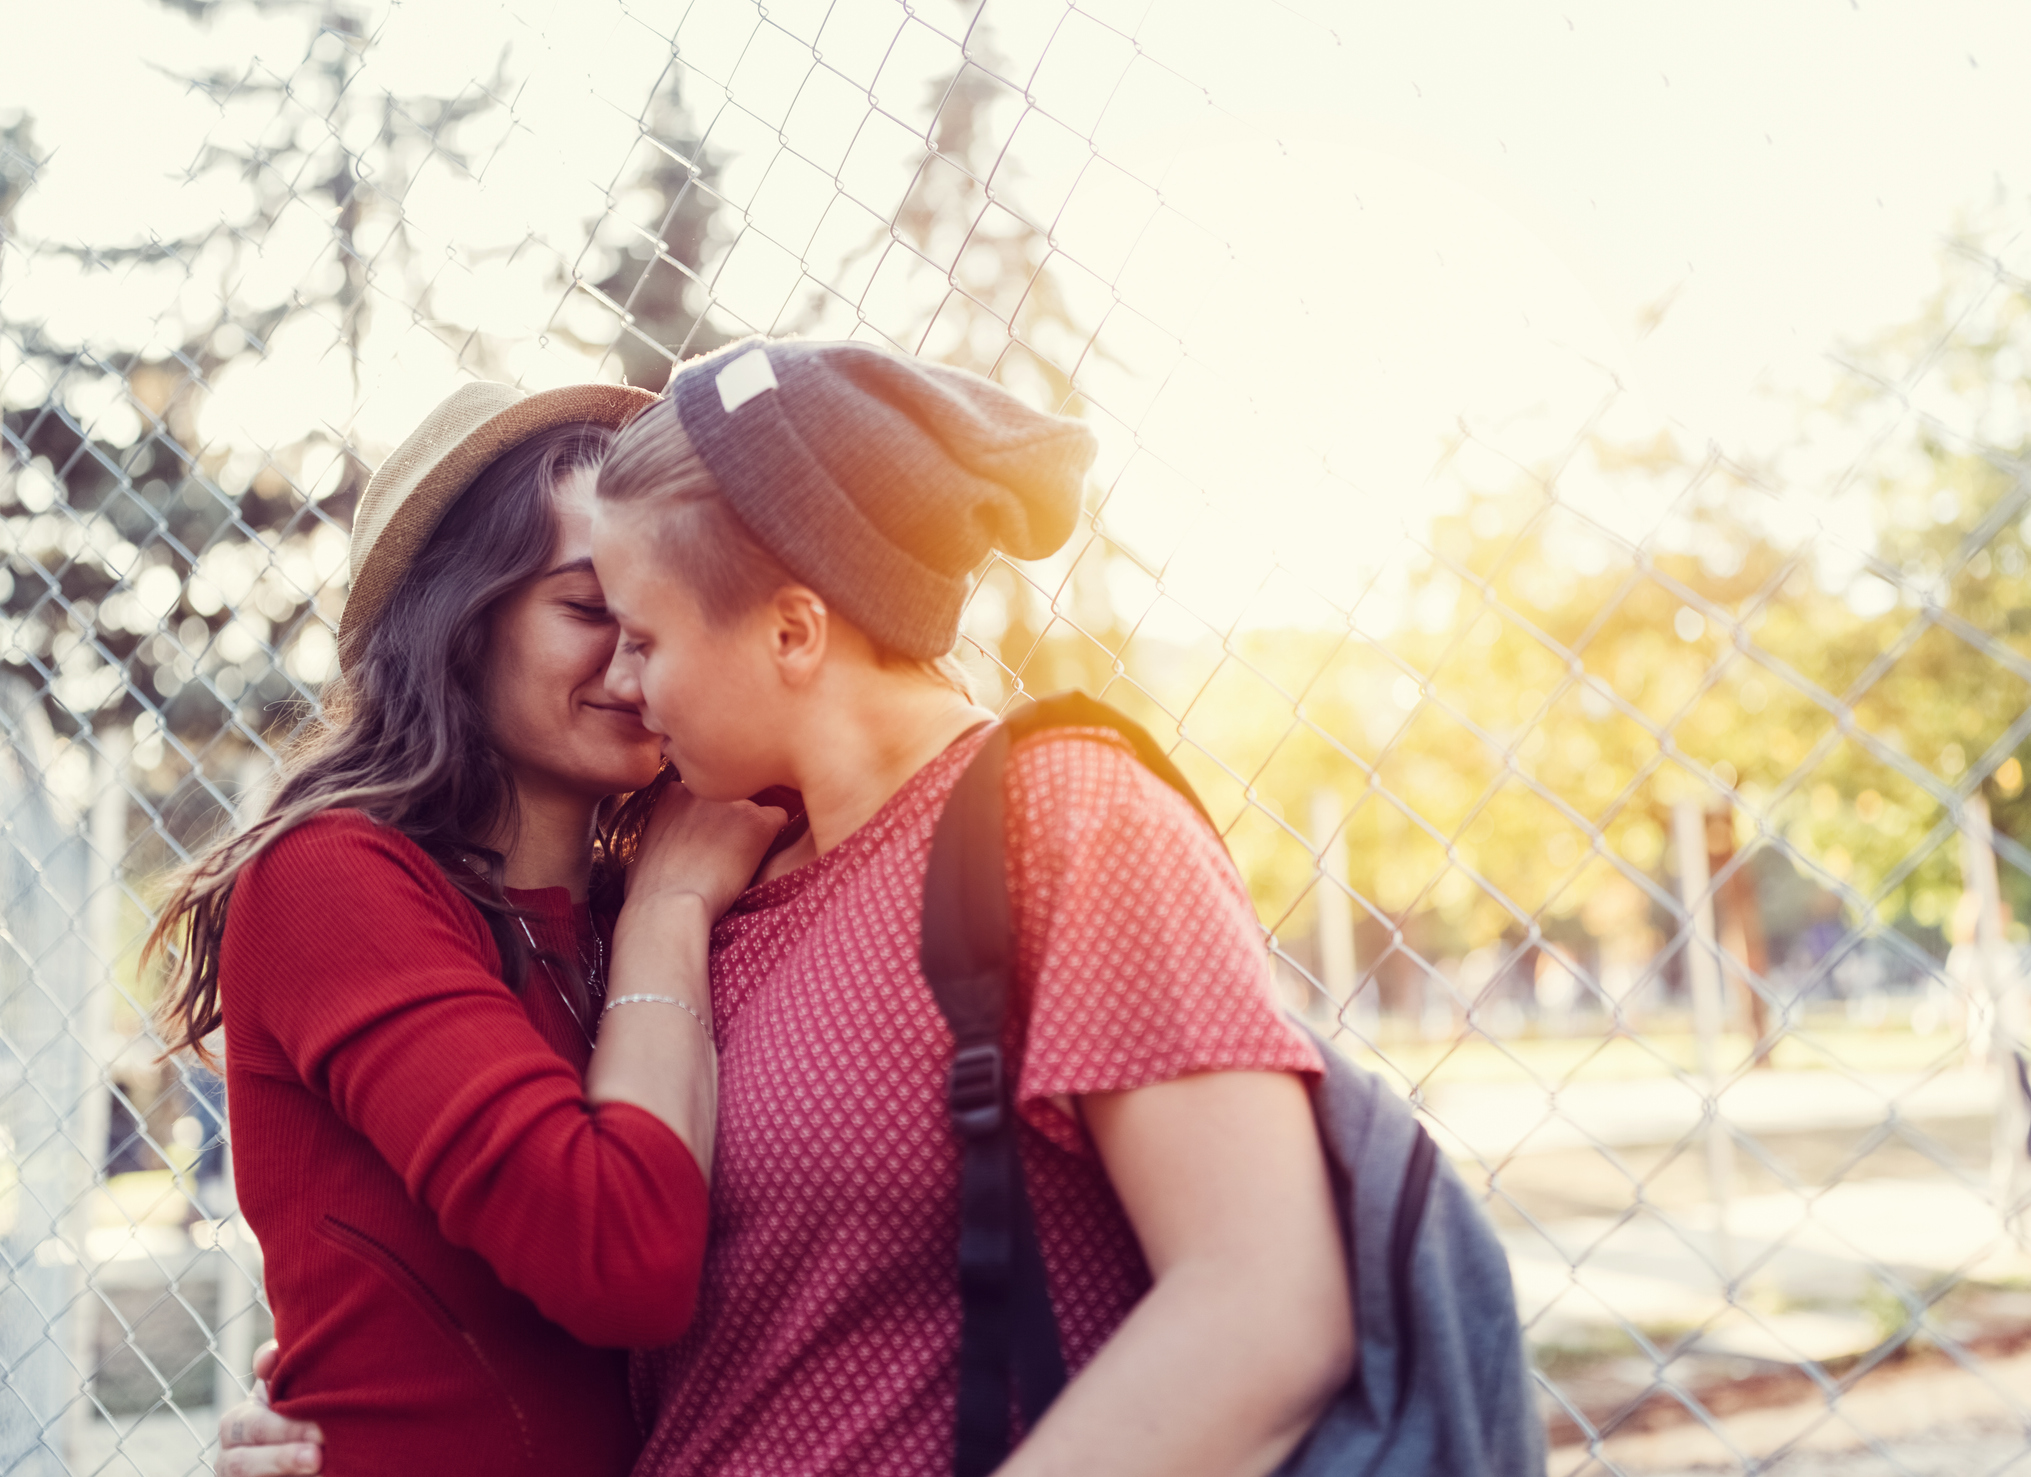 LGBTQ couple kissing in the city park